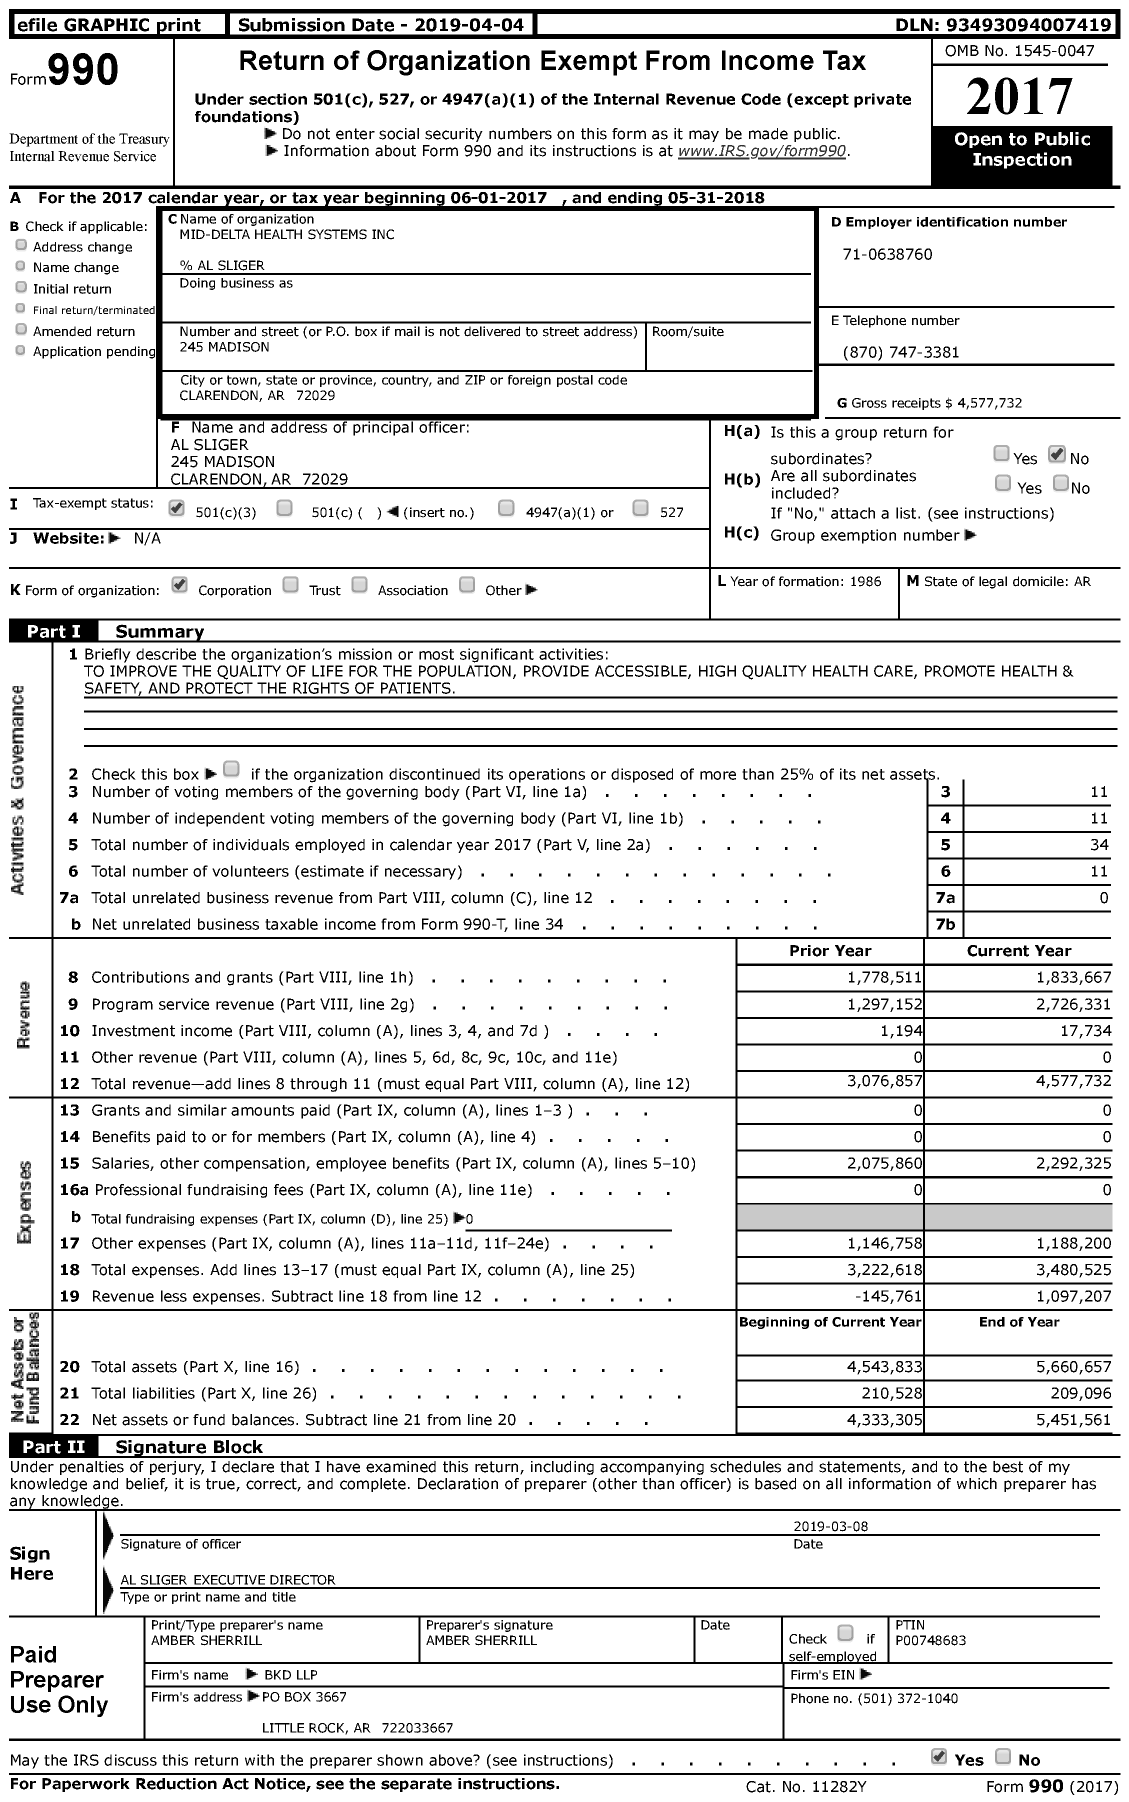 Image of first page of 2017 Form 990 for Mid-Delta Health Systems